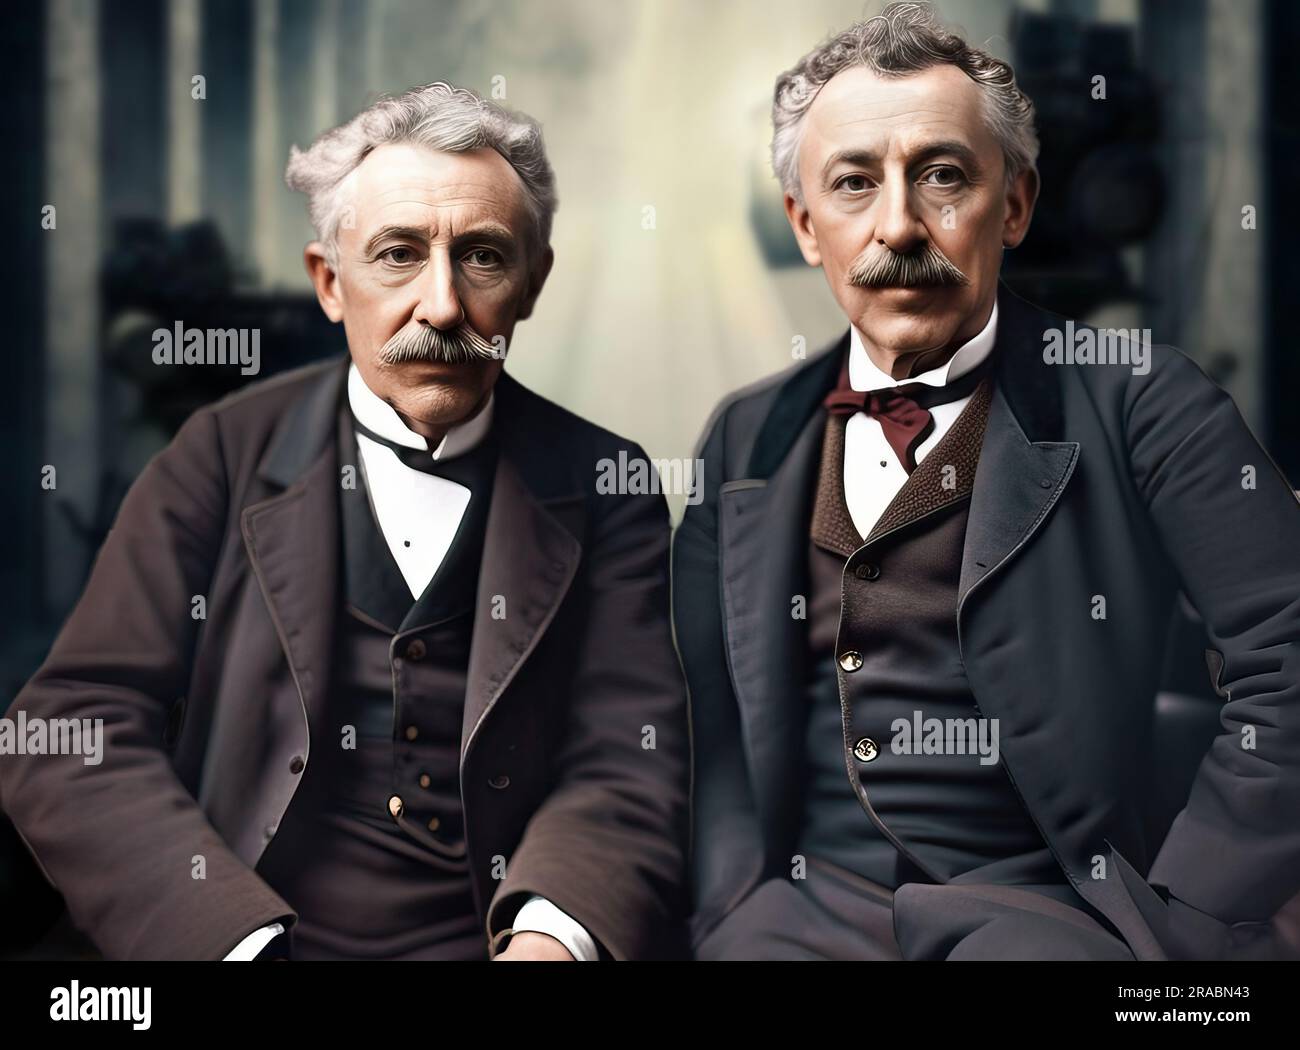 The Auguste Marie Louis Nicolas Lumière brothers were two French entrepreneurs, inventors of the film projector and among the first filmmakers in hist Stock Photo